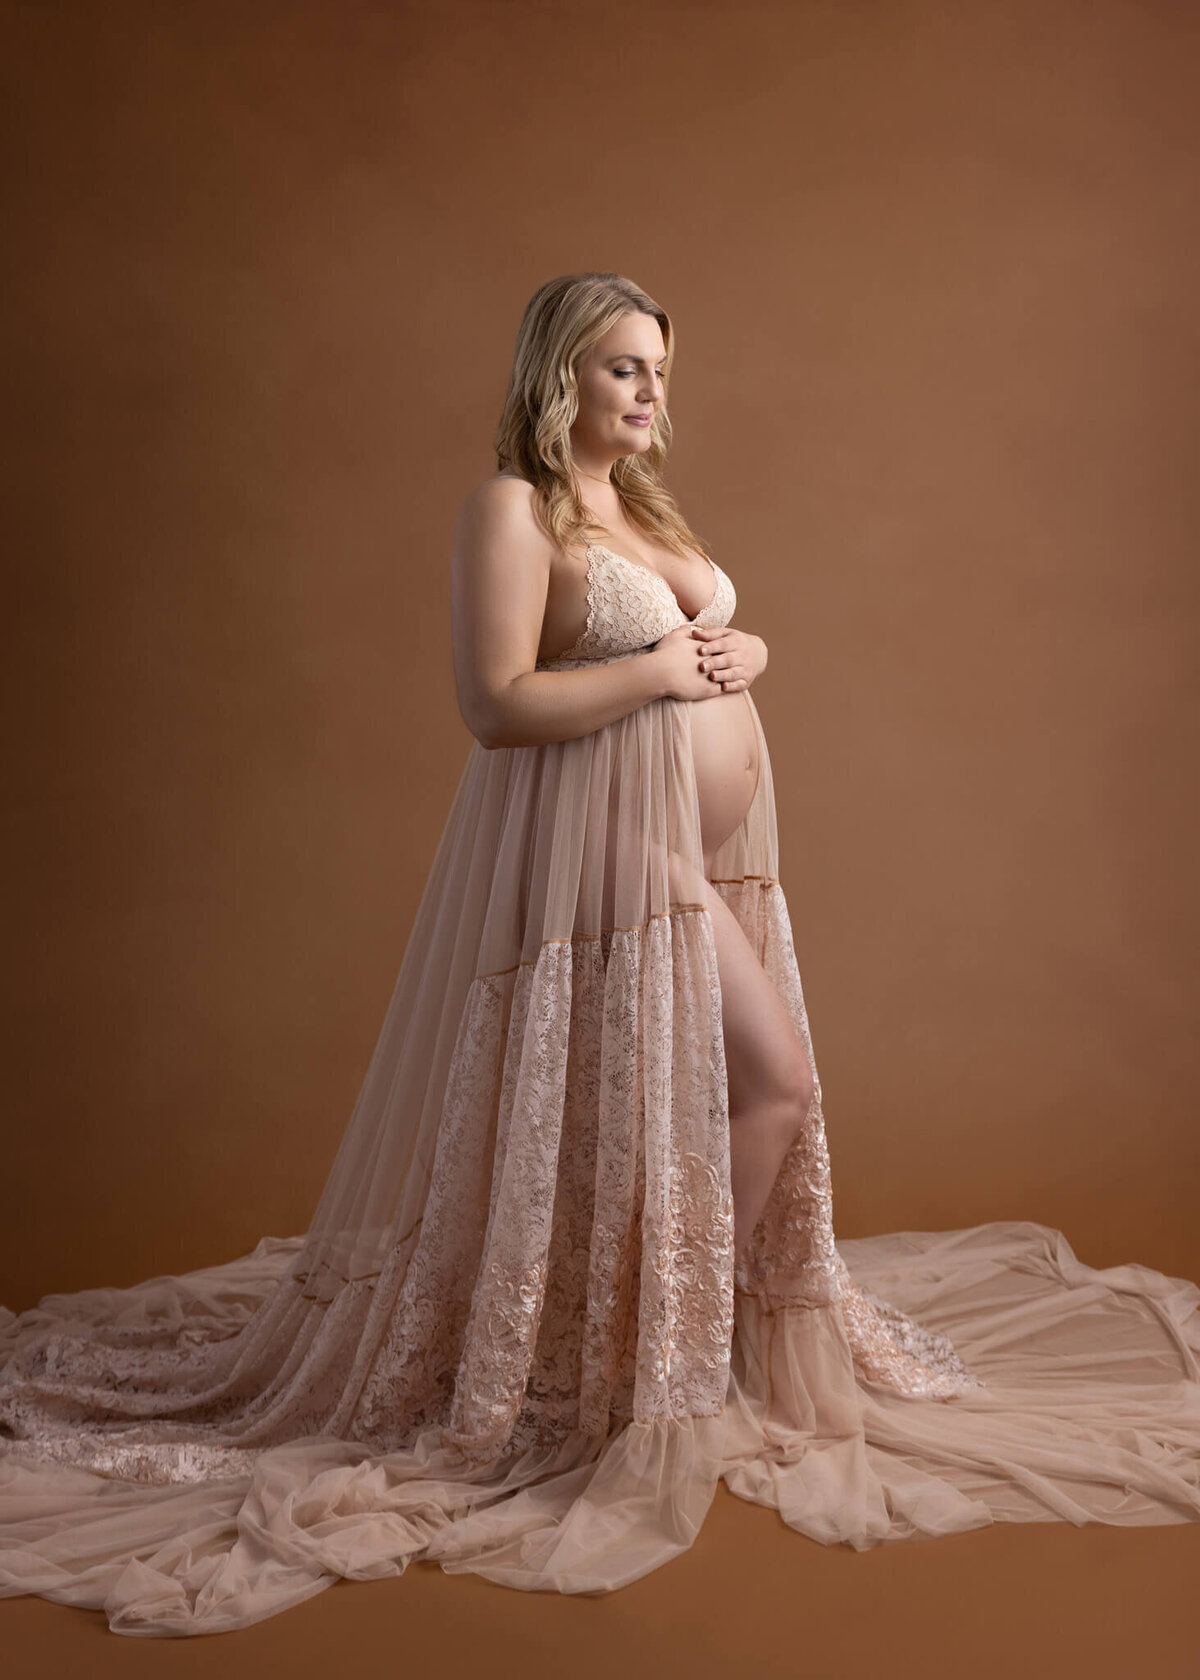 pregnant woman in flowy dress with both hands on her belly